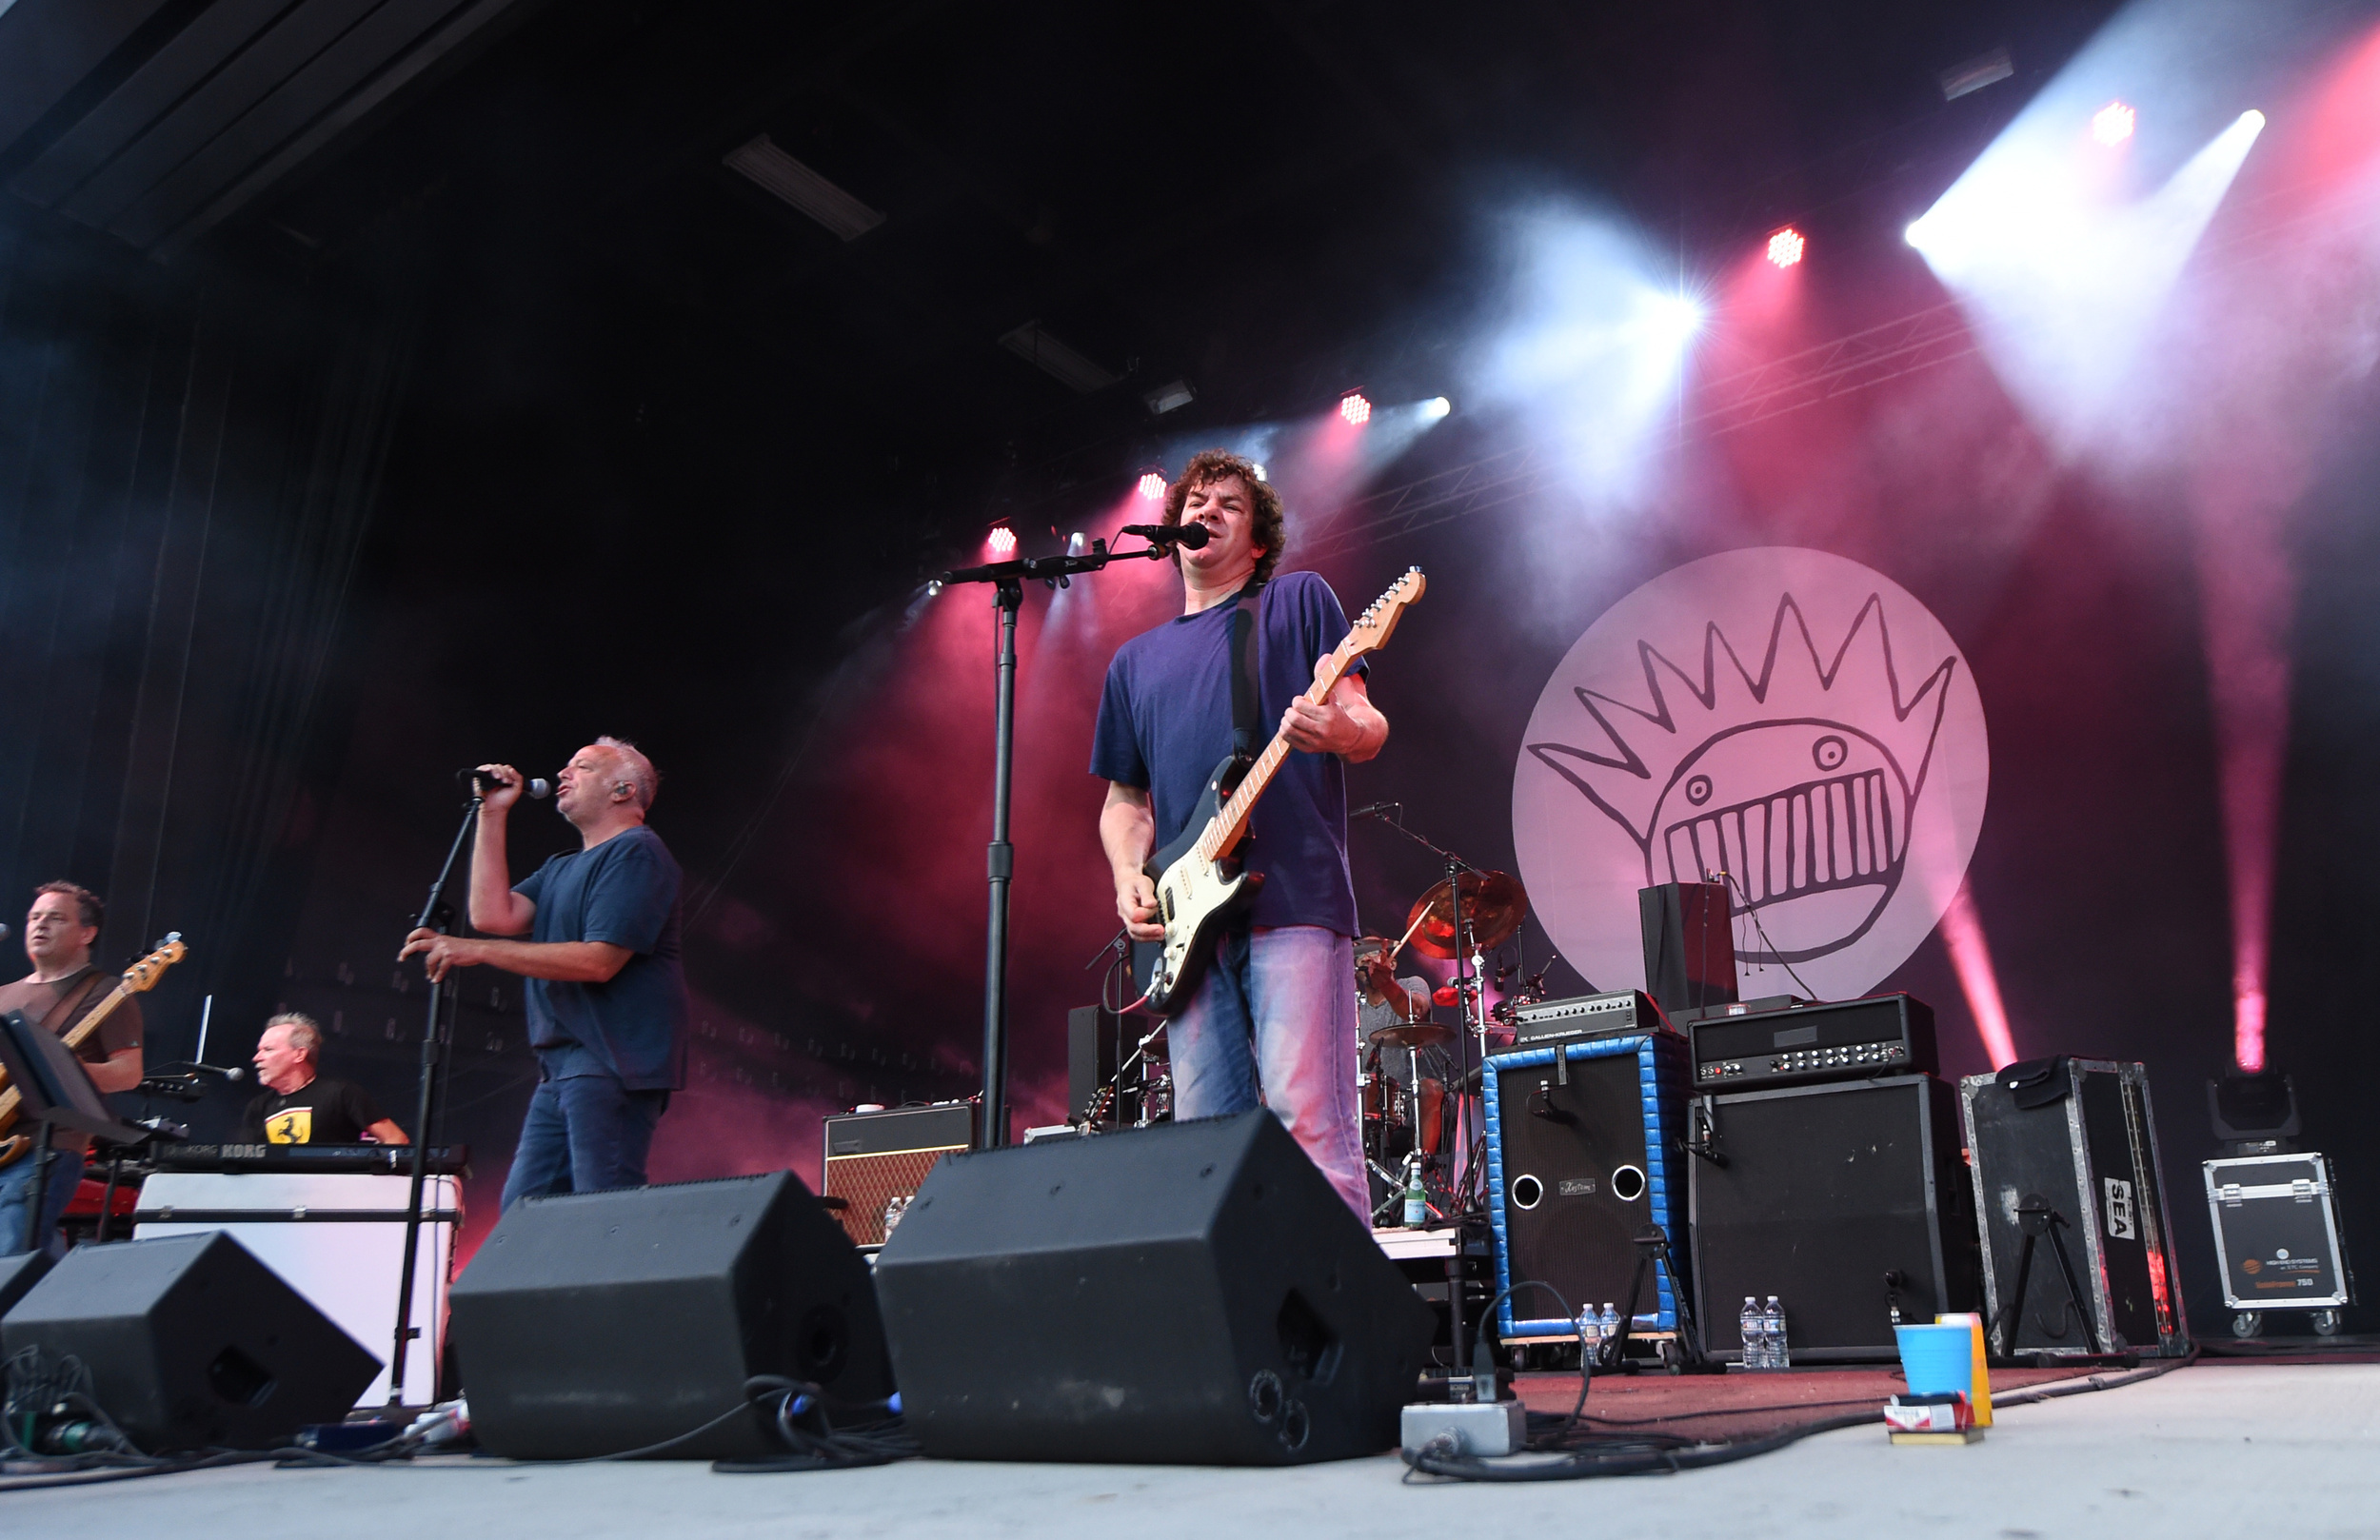 <p>Perhaps the major intrigue regarding Ween is its overall sound. Undisputedly alternative, there are various elements of funk, metal, punk, and even some soul and country. That's a lot to digest, but Gene and Dean Ween (a.k.a. Aaron Freeman and Mickey Melchiondo, respectively) and Co. were consistently one of the most creative and ingenious groups during the 1990s and into the 2000s. Not to mention the Ween's allegiance to <a href="https://www.youtube.com/watch?v=f99pjpQQUHc">Boognish</a>, the <a href="https://thekey.xpn.org/2016/08/17/megafans-guide-ween/">Demon God </a>that has pretty much fueled the band throughout its existence. </p><p><a href='https://www.msn.com/en-us/community/channel/vid-cj9pqbr0vn9in2b6ddcd8sfgpfq6x6utp44fssrv6mc2gtybw0us'>Did you enjoy this slideshow? Follow us on MSN to see more of our exclusive entertainment content.</a></p>